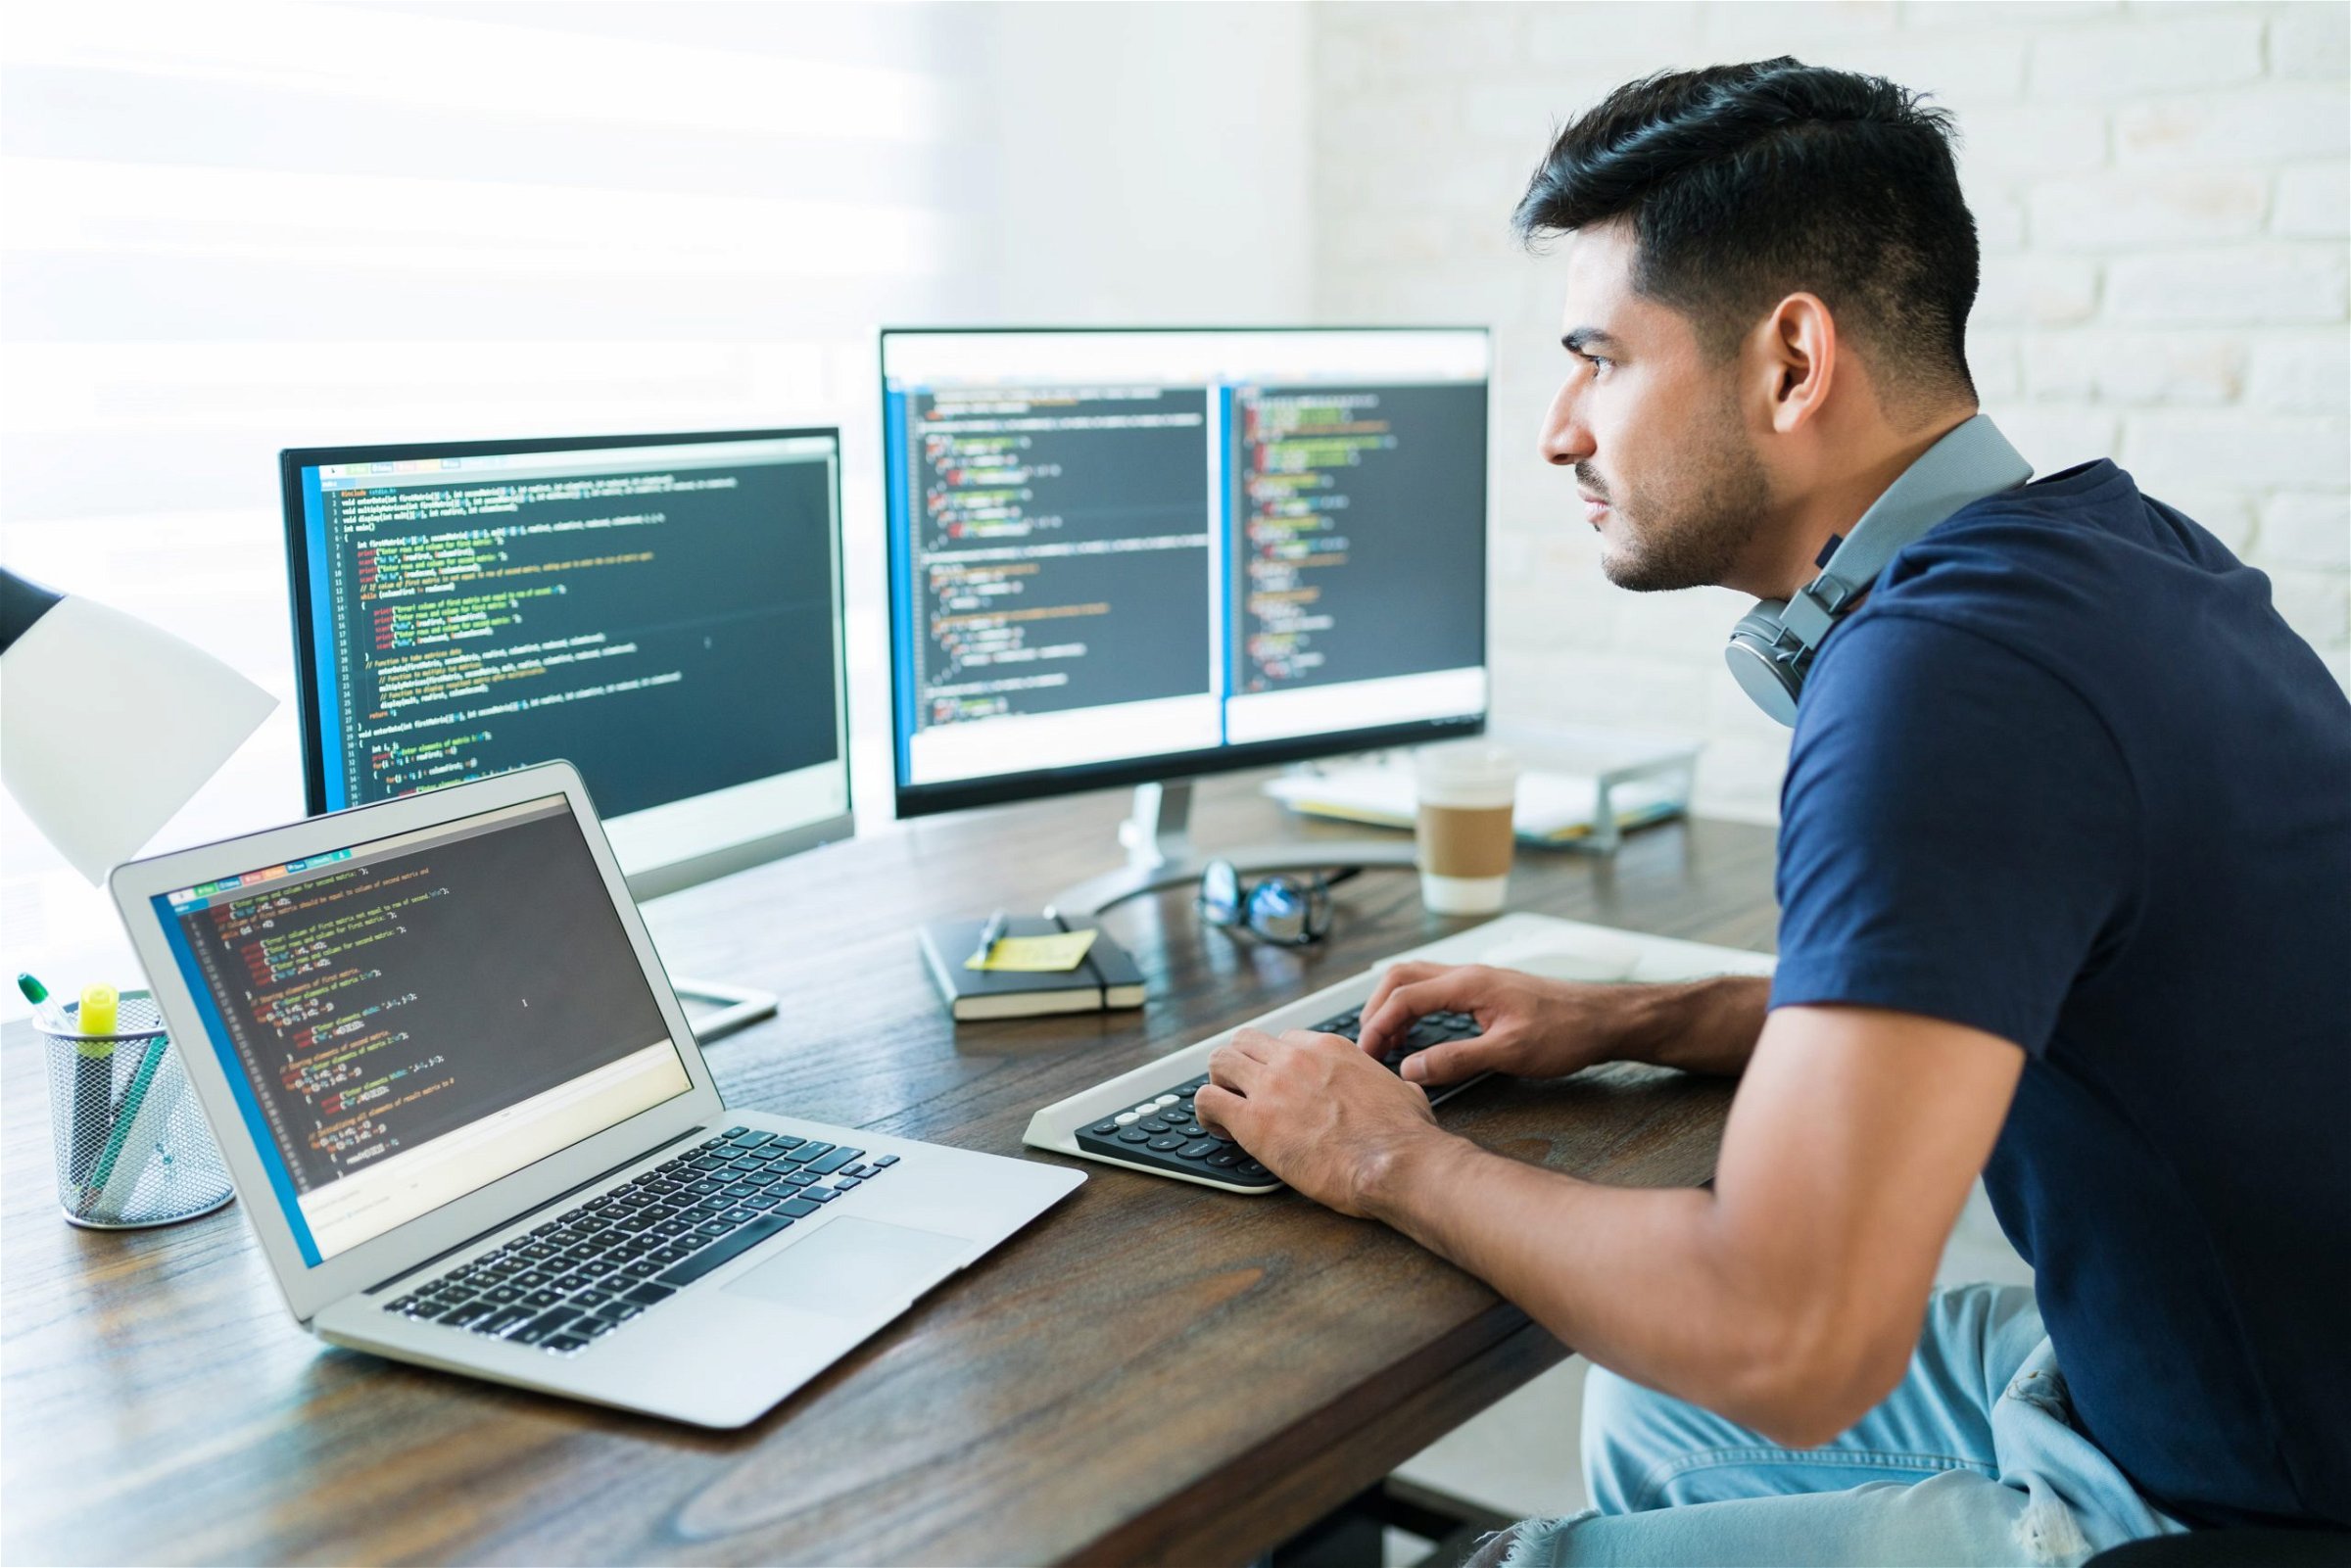 How to become an DevOps Engineer in 2022